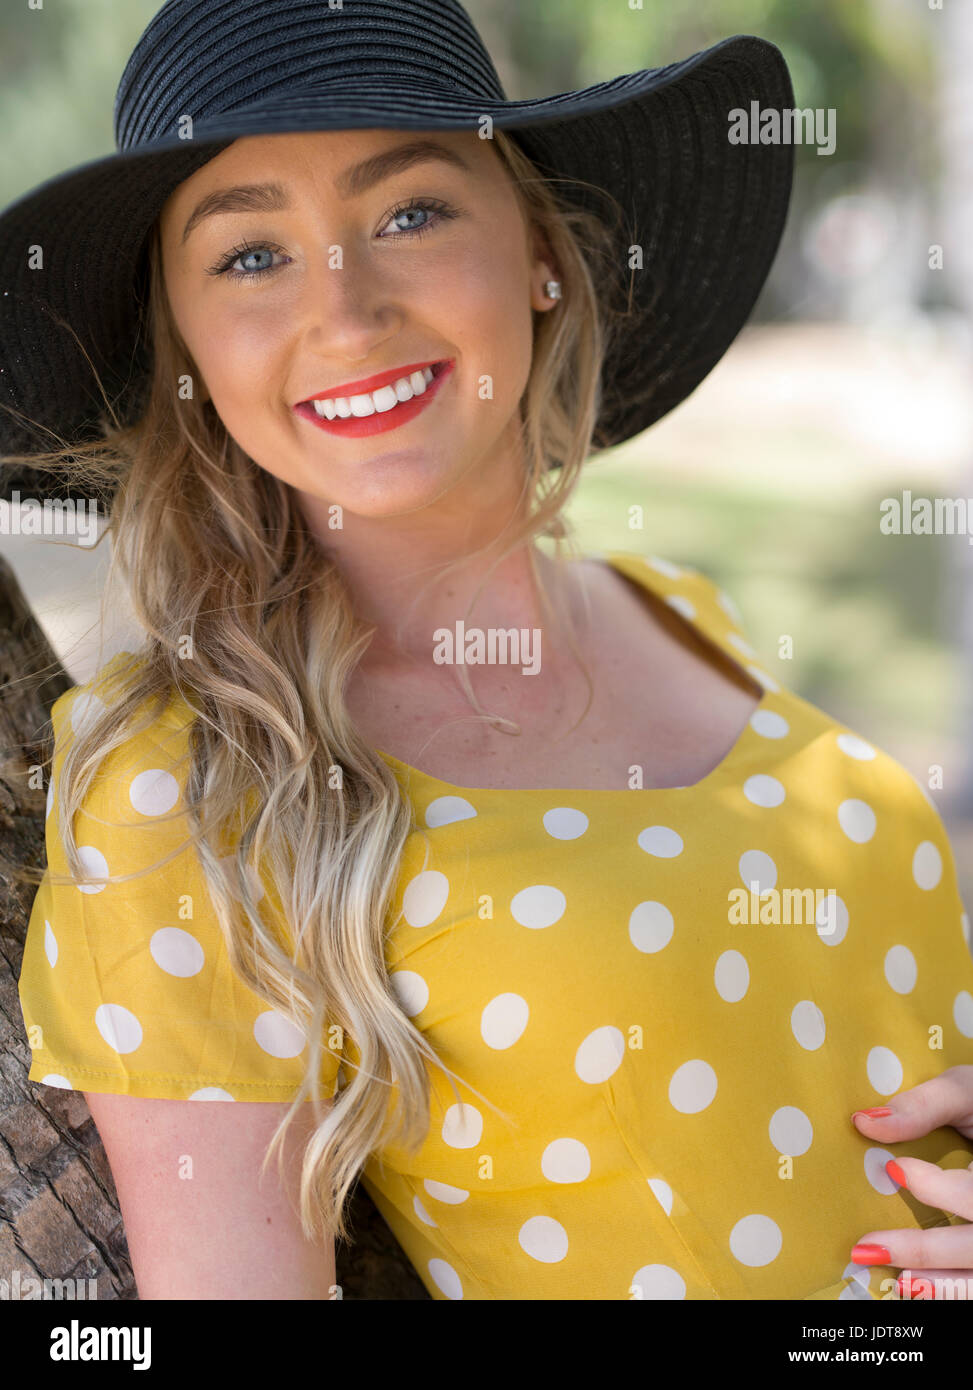 Young Blonde Australian Girl In High Stock Photography and Images - Alamy